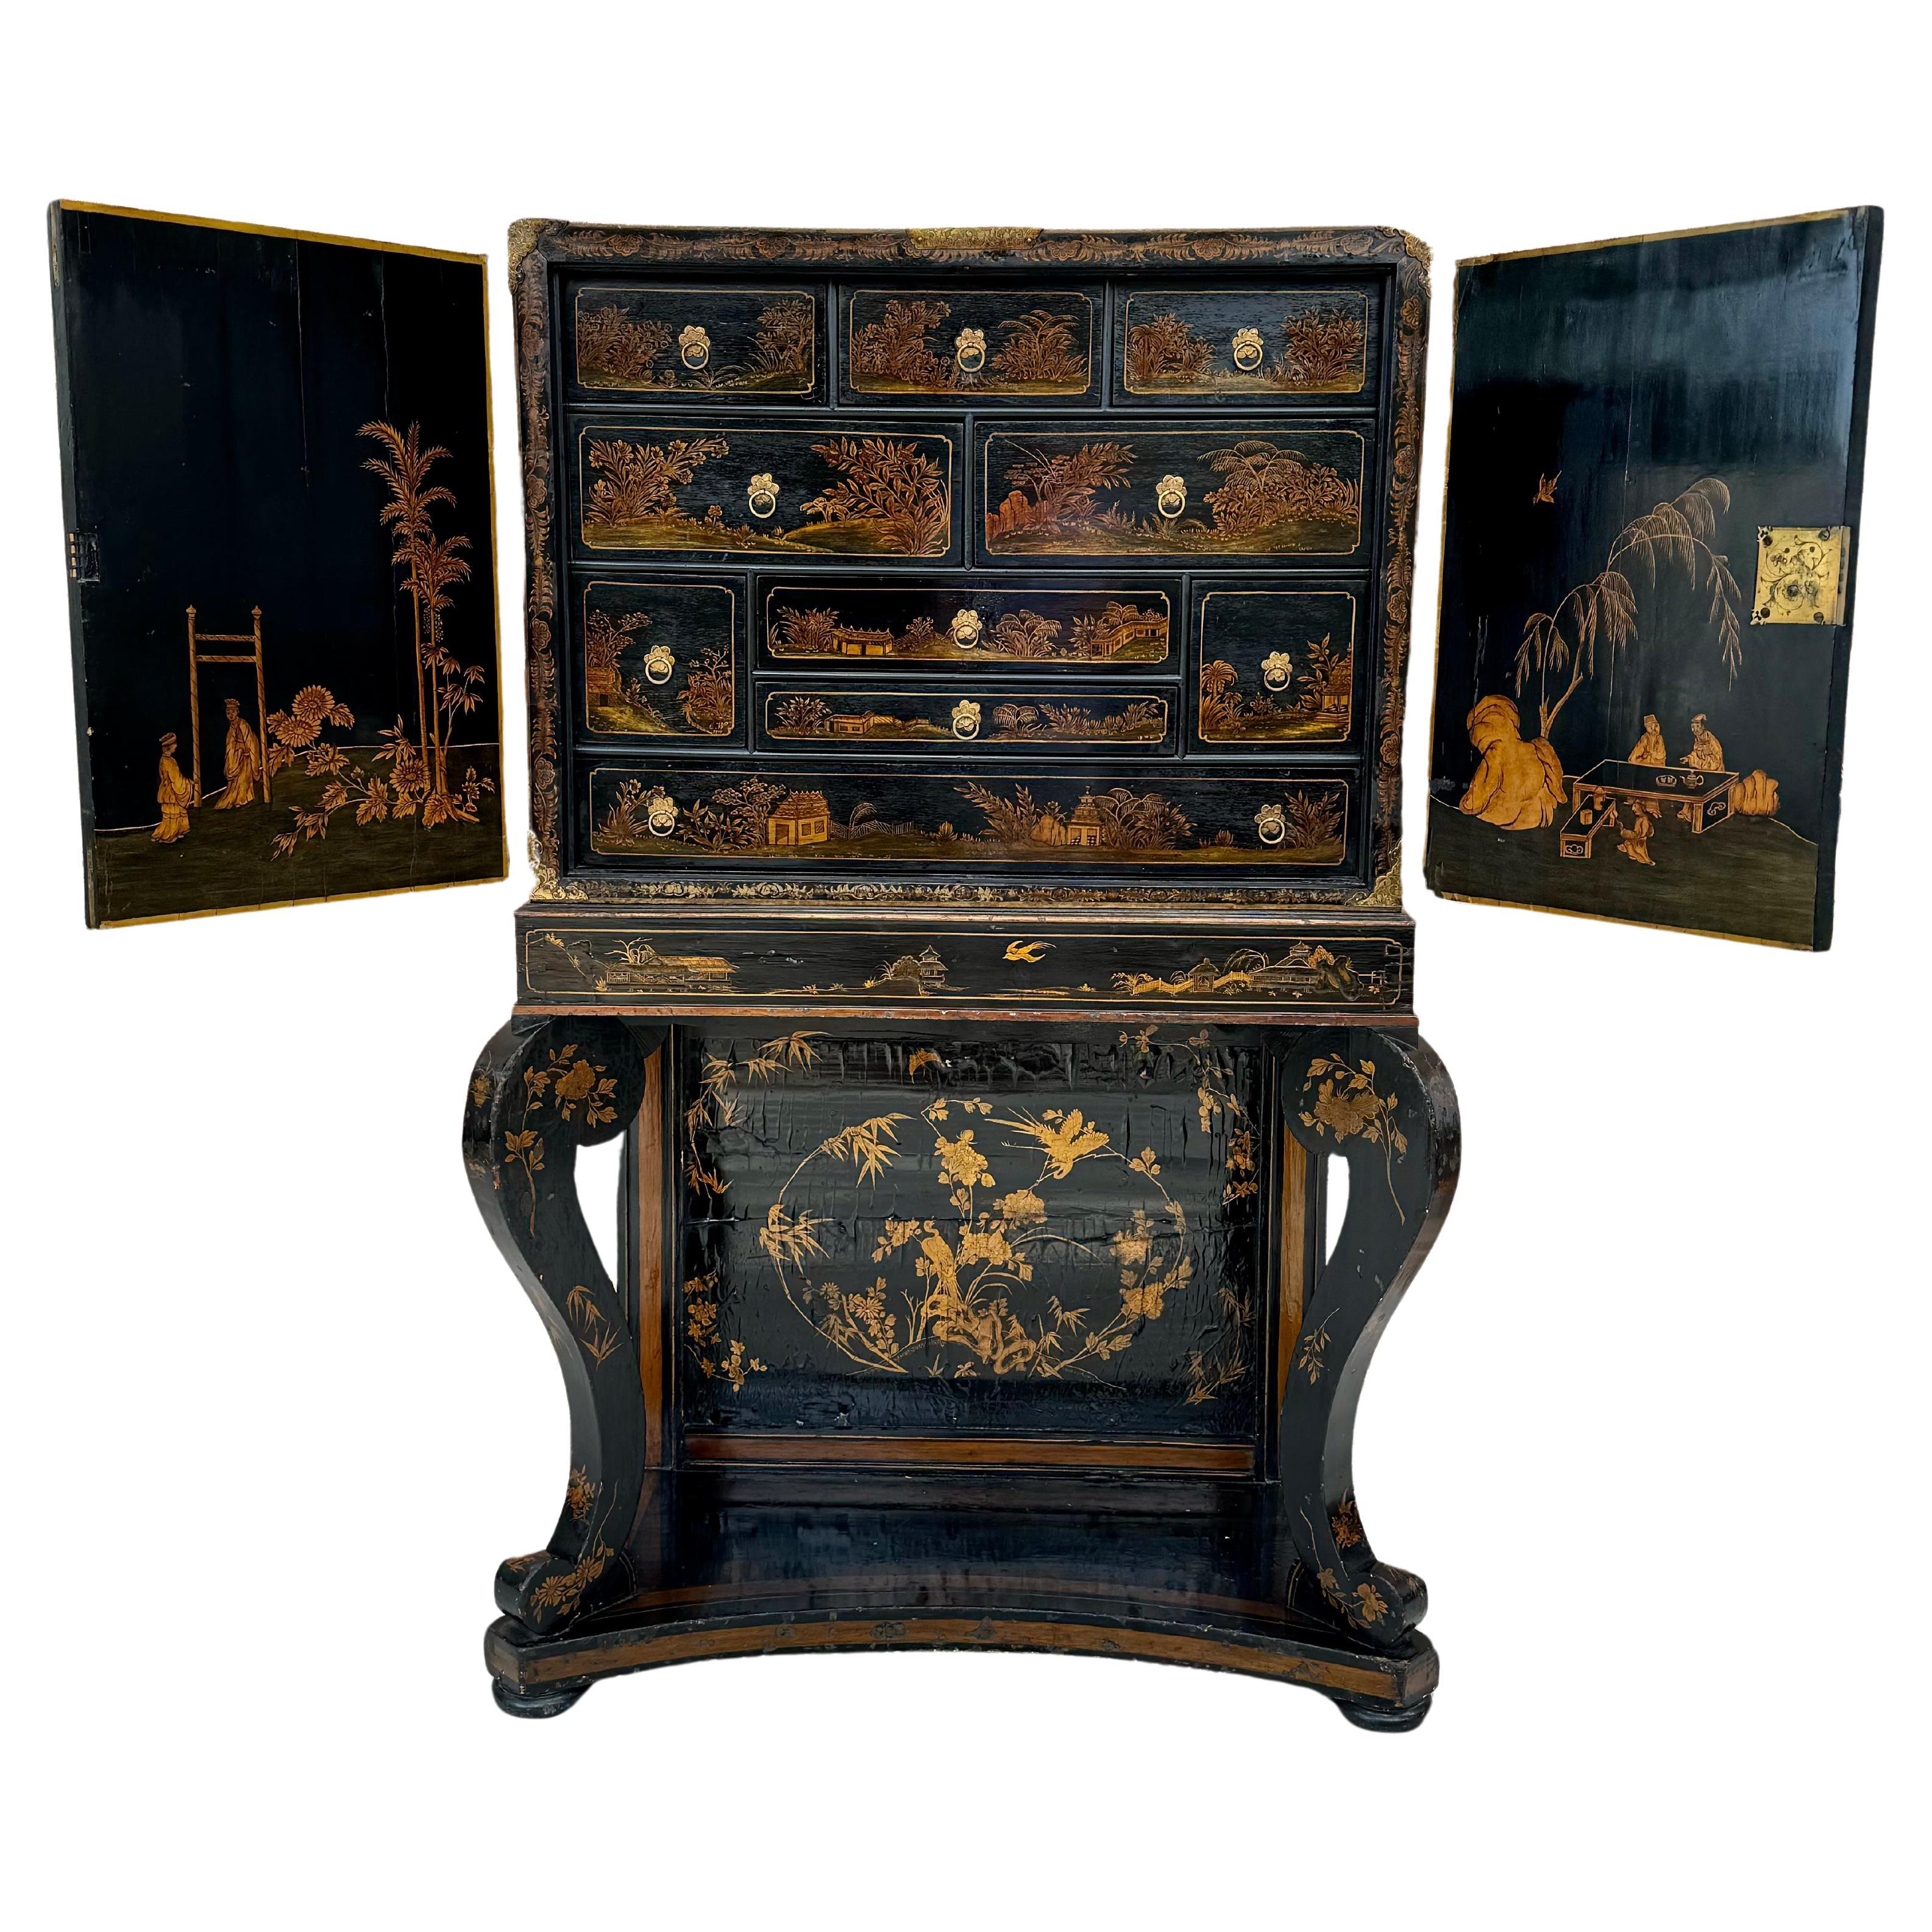 Rare Late 18th or Early 19th Century English Regency Chinoiserie chest on stand with Japanned lacquered finish in black and gold. This cabinet has two doors with scenic Chinoiserie decoration both on the exterior and interior, open to a concealed